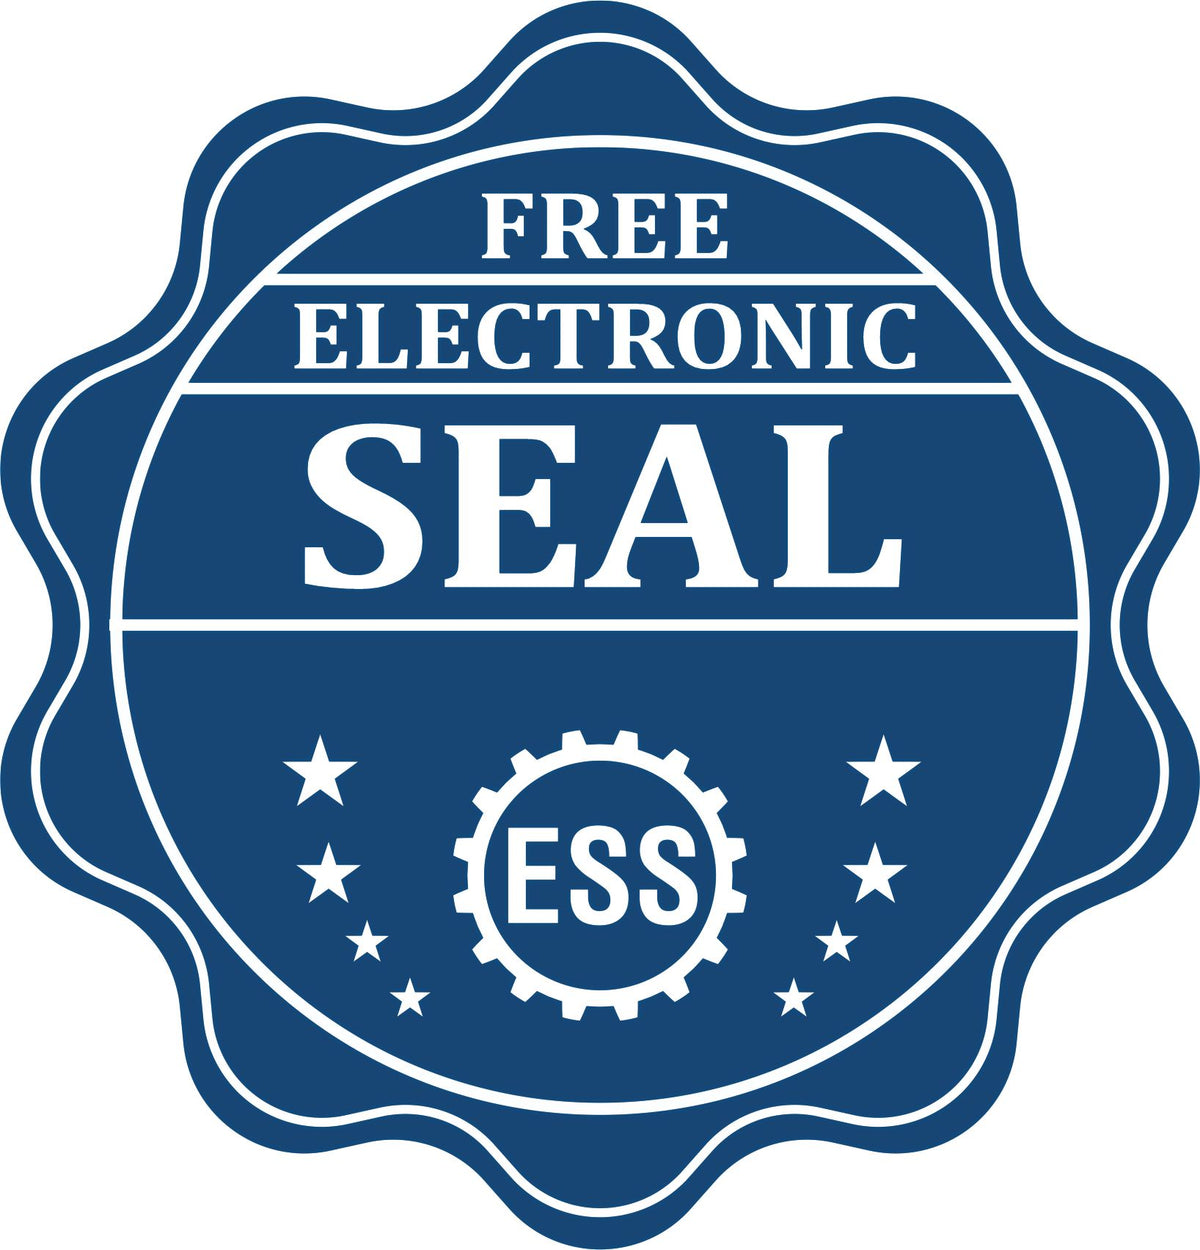 A badge showing a free electronic seal for the State of Massachusetts Extended Long Reach Engineer Seal with stars and the ESS gear on the emblem.